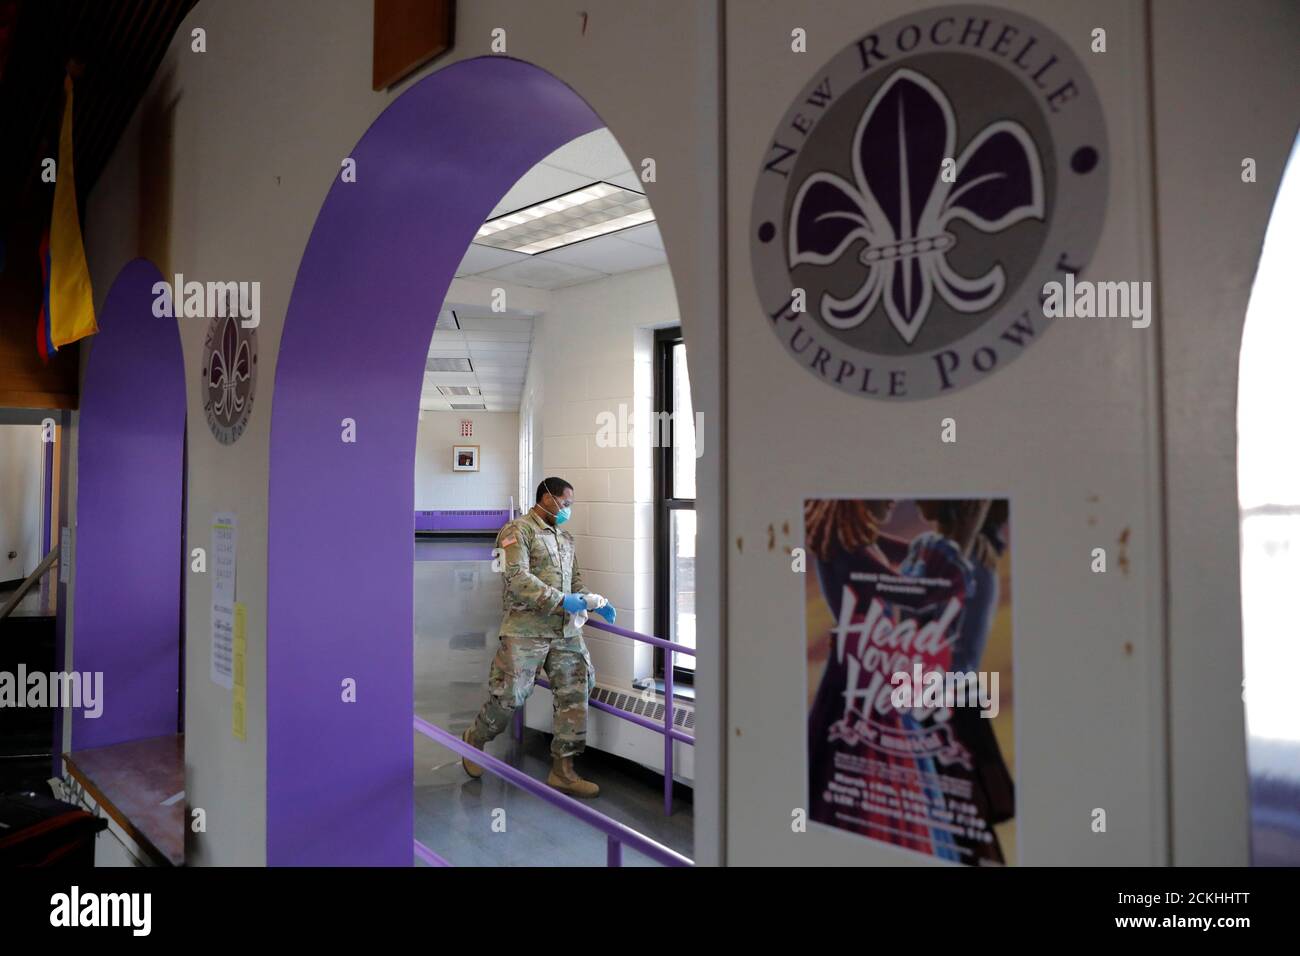 A member of Joint Task Force 2, composed of soldiers and airmen from the New York Army and Air National Guard, works to sanitize the New Rochelle High School during the coronavirus disease (COVID-19) outbreak in New Rochelle, New York, U.S., March 21, 2020. REUTERS/Andrew Kelly Stock Photo